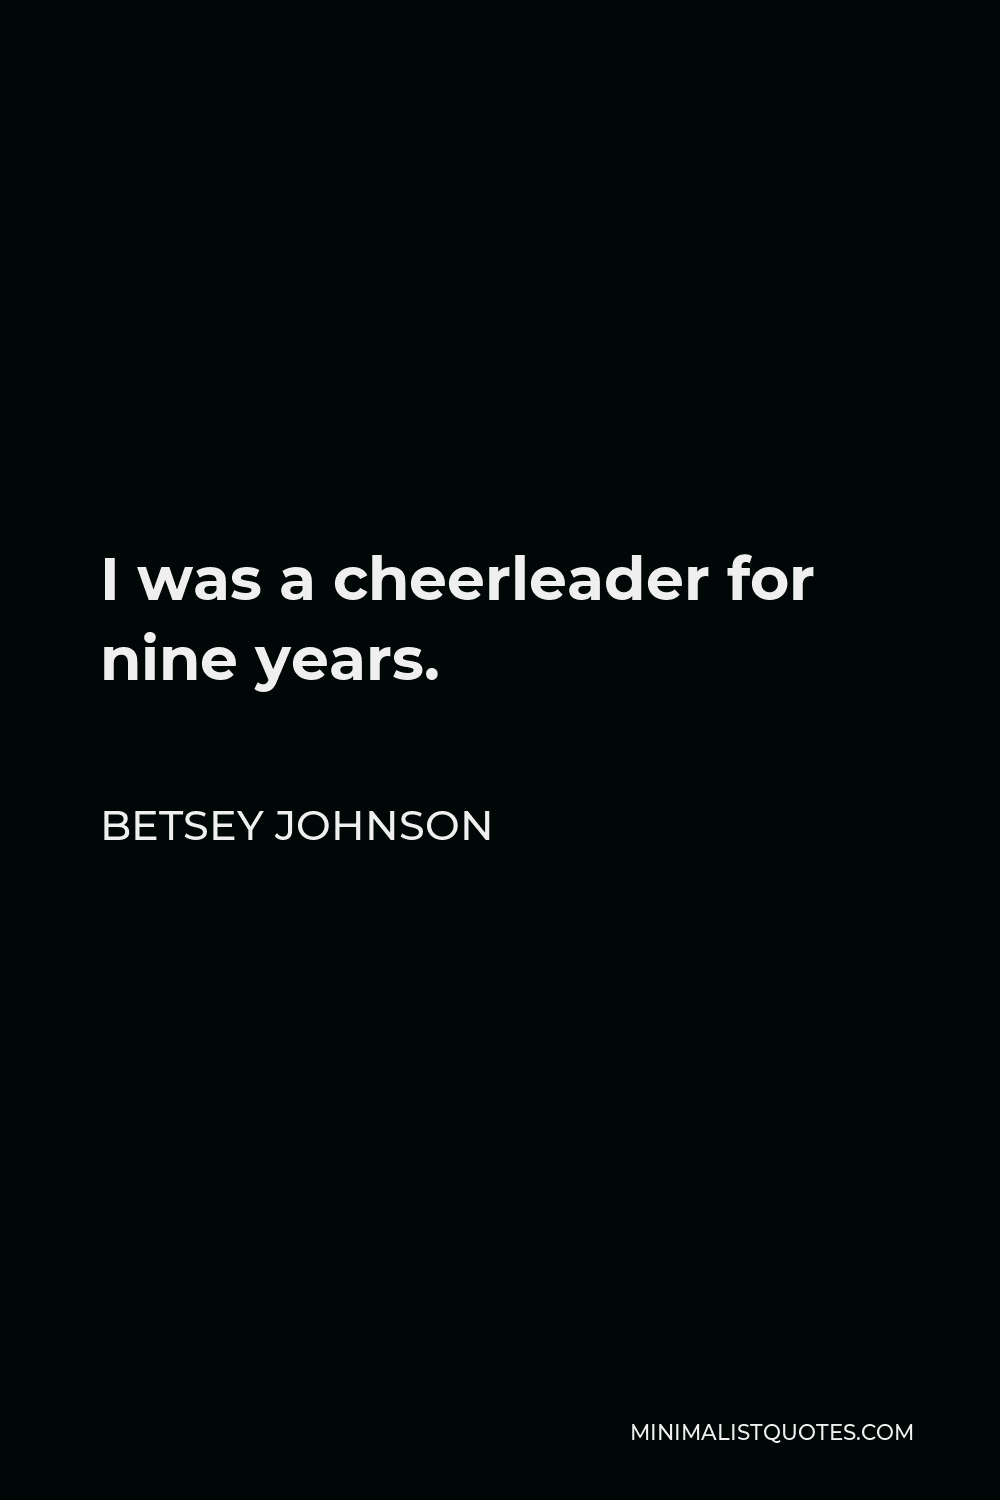 Betsey Johnson Quote - I was a cheerleader for nine years.